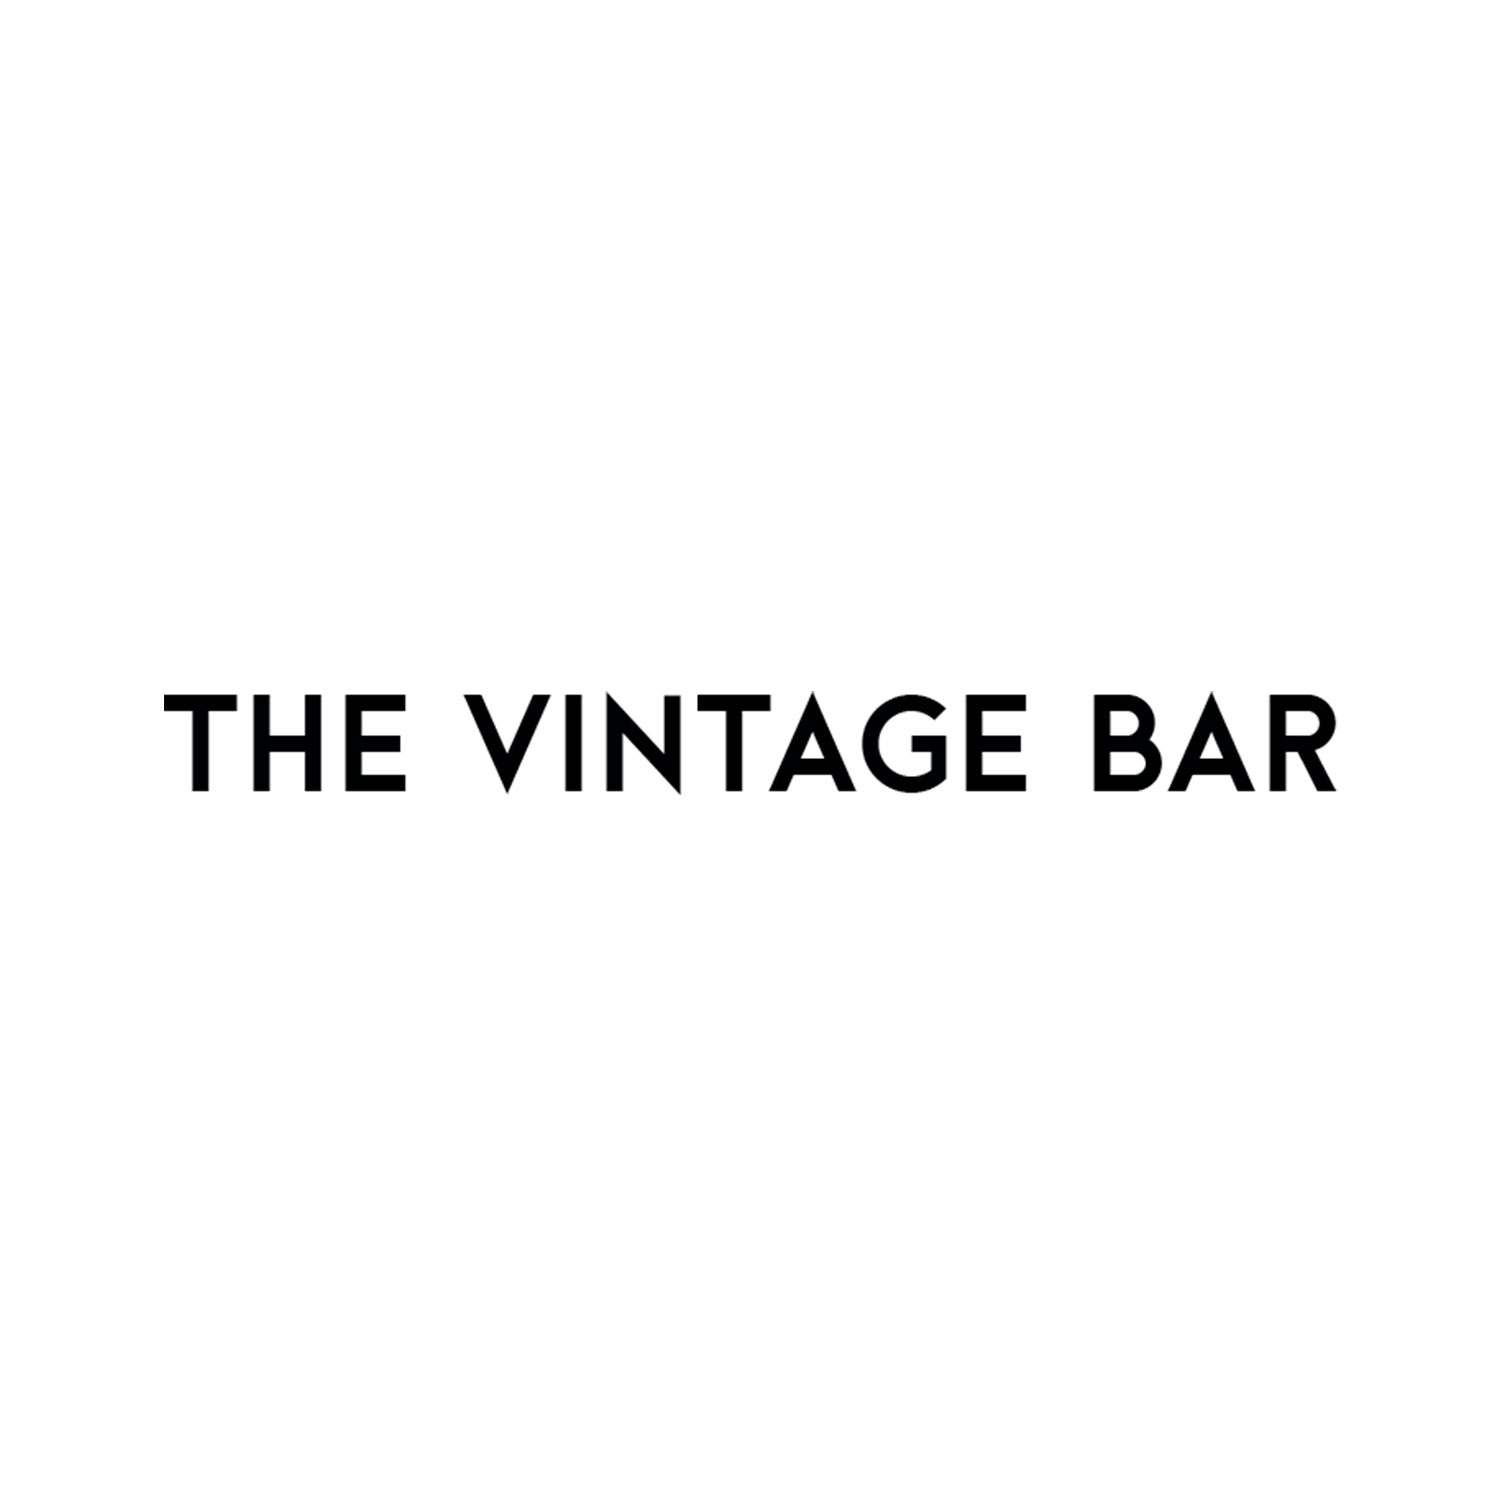 The Vintage Bar - Did you know that the Louis Vuitton Noe style